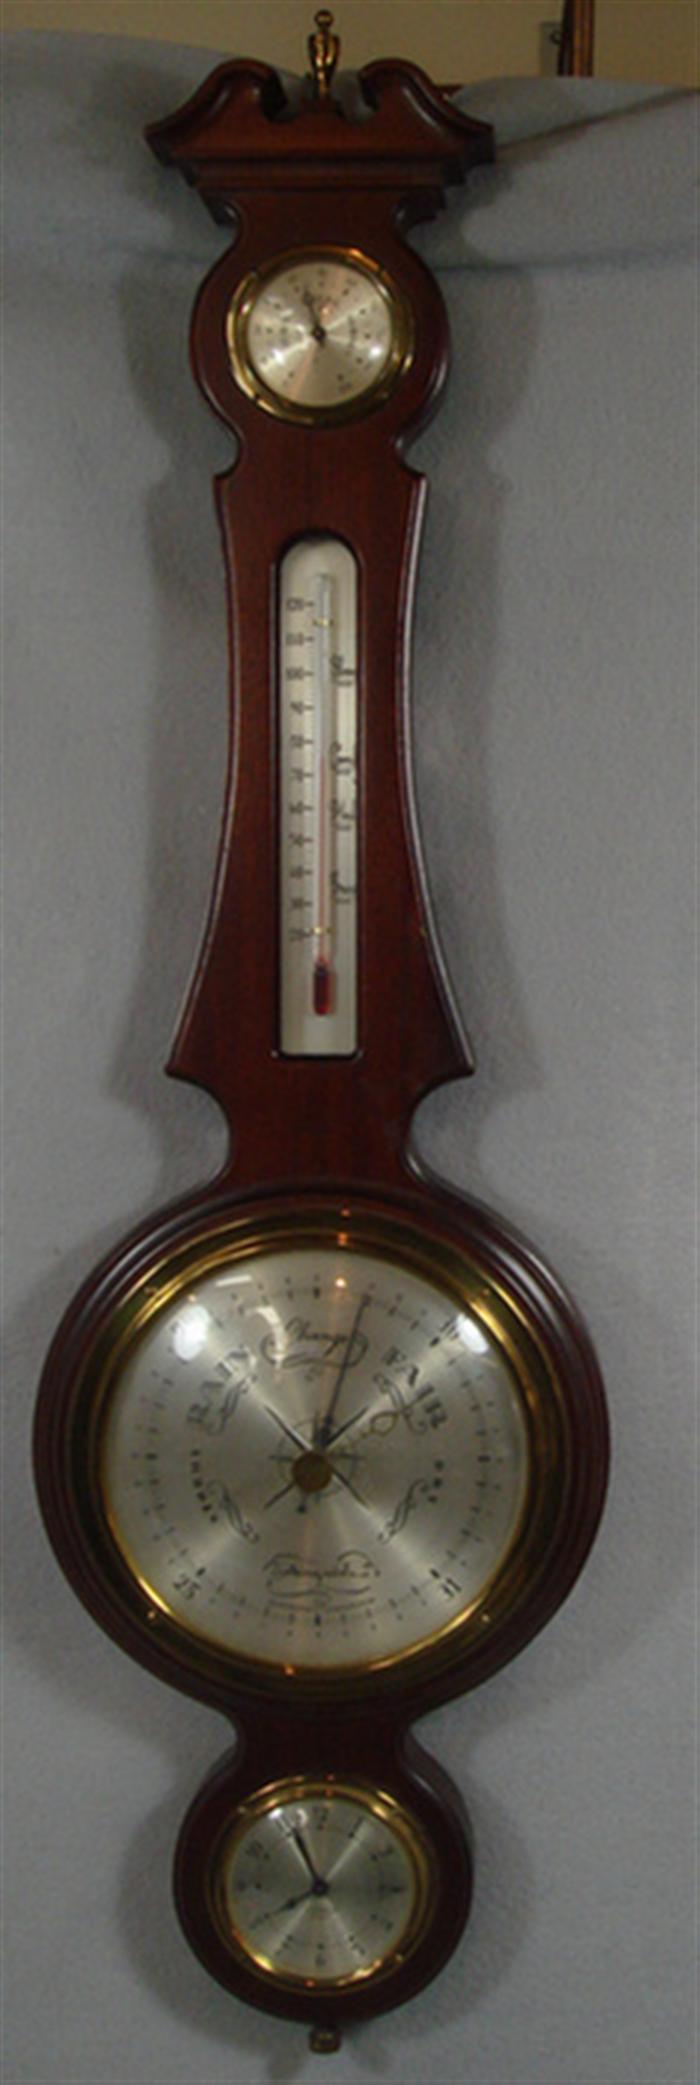 Airguide aneroid barometer with stem